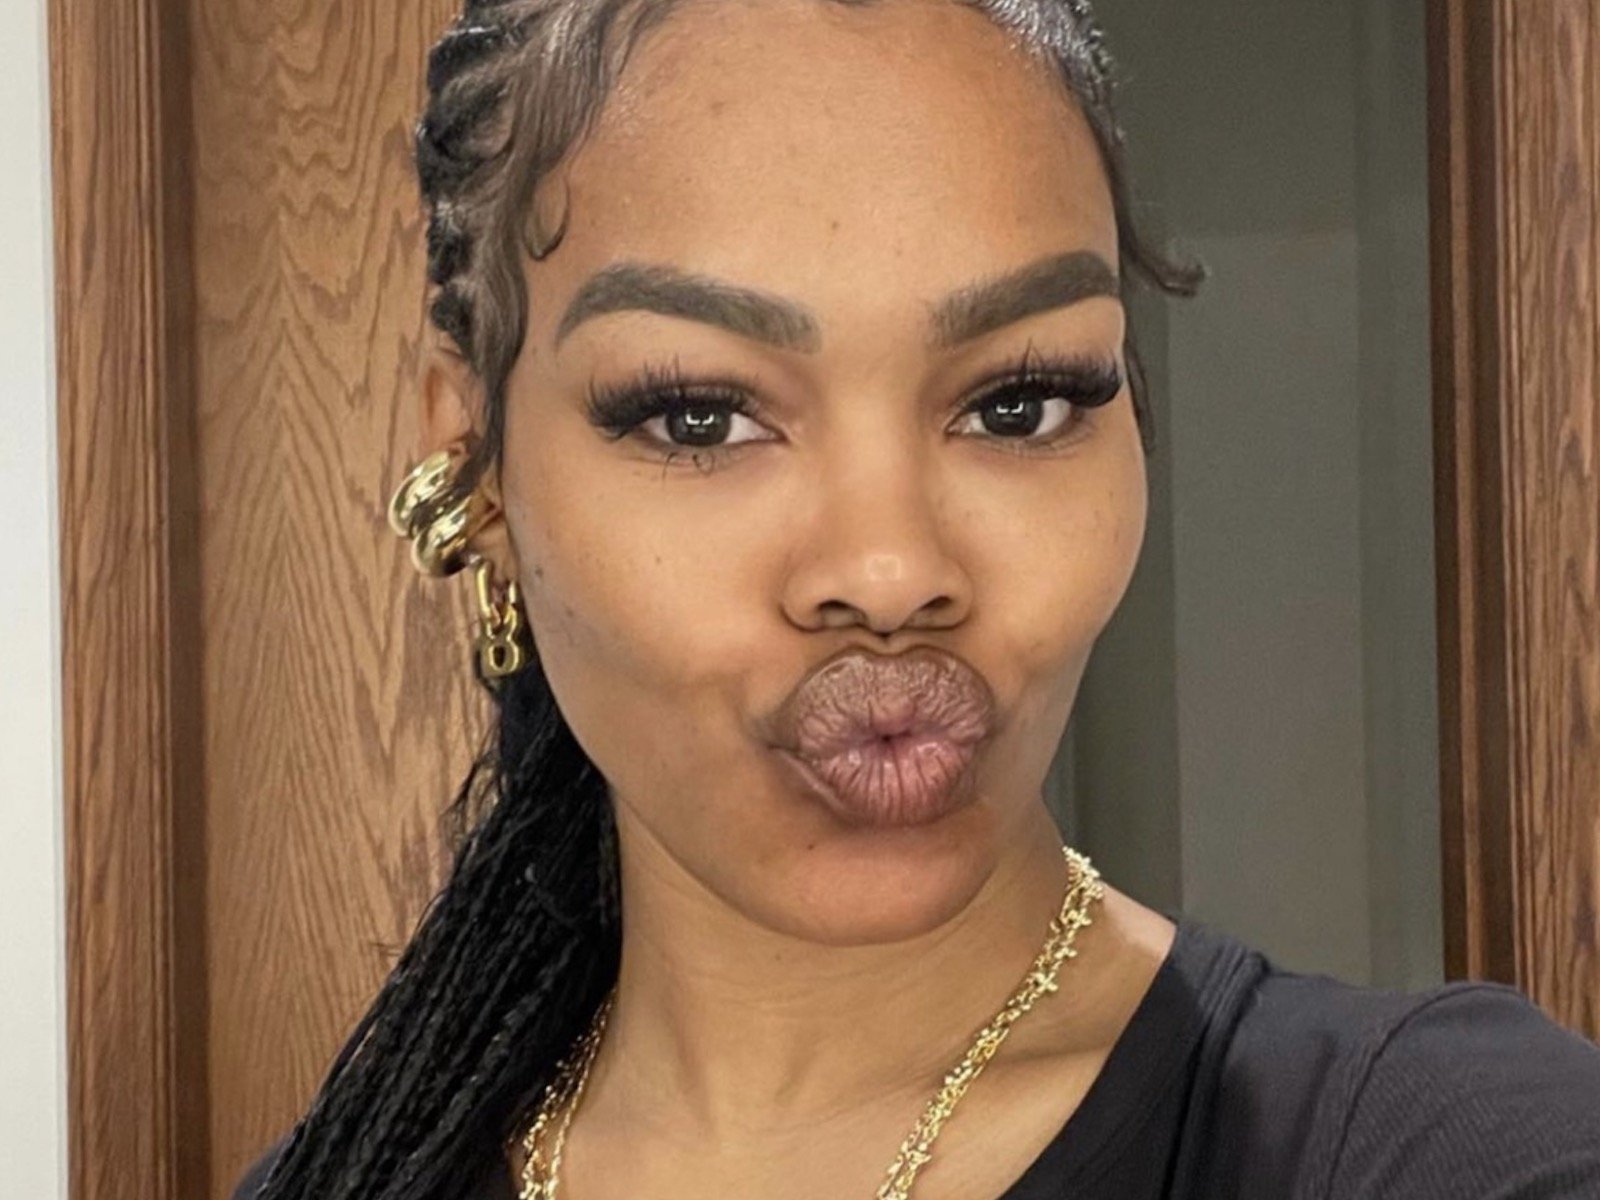 Teyana Taylor: It's all types of yummy grubbing teaming with Sweetgreen ...